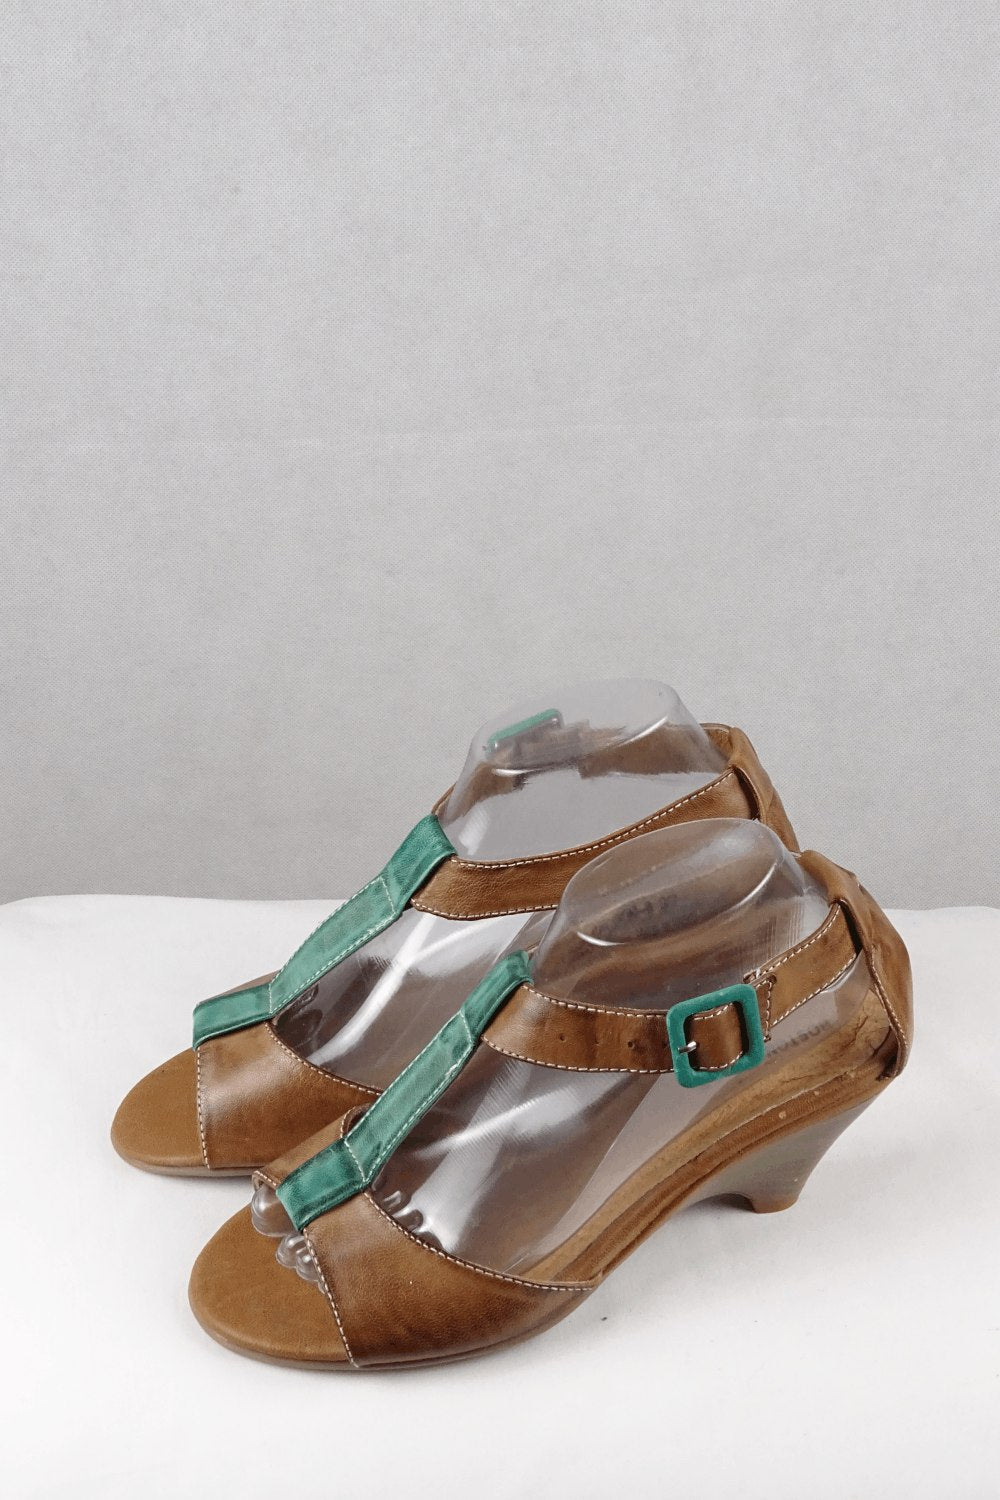 Boston Belle Brown And Blue Sandals 39